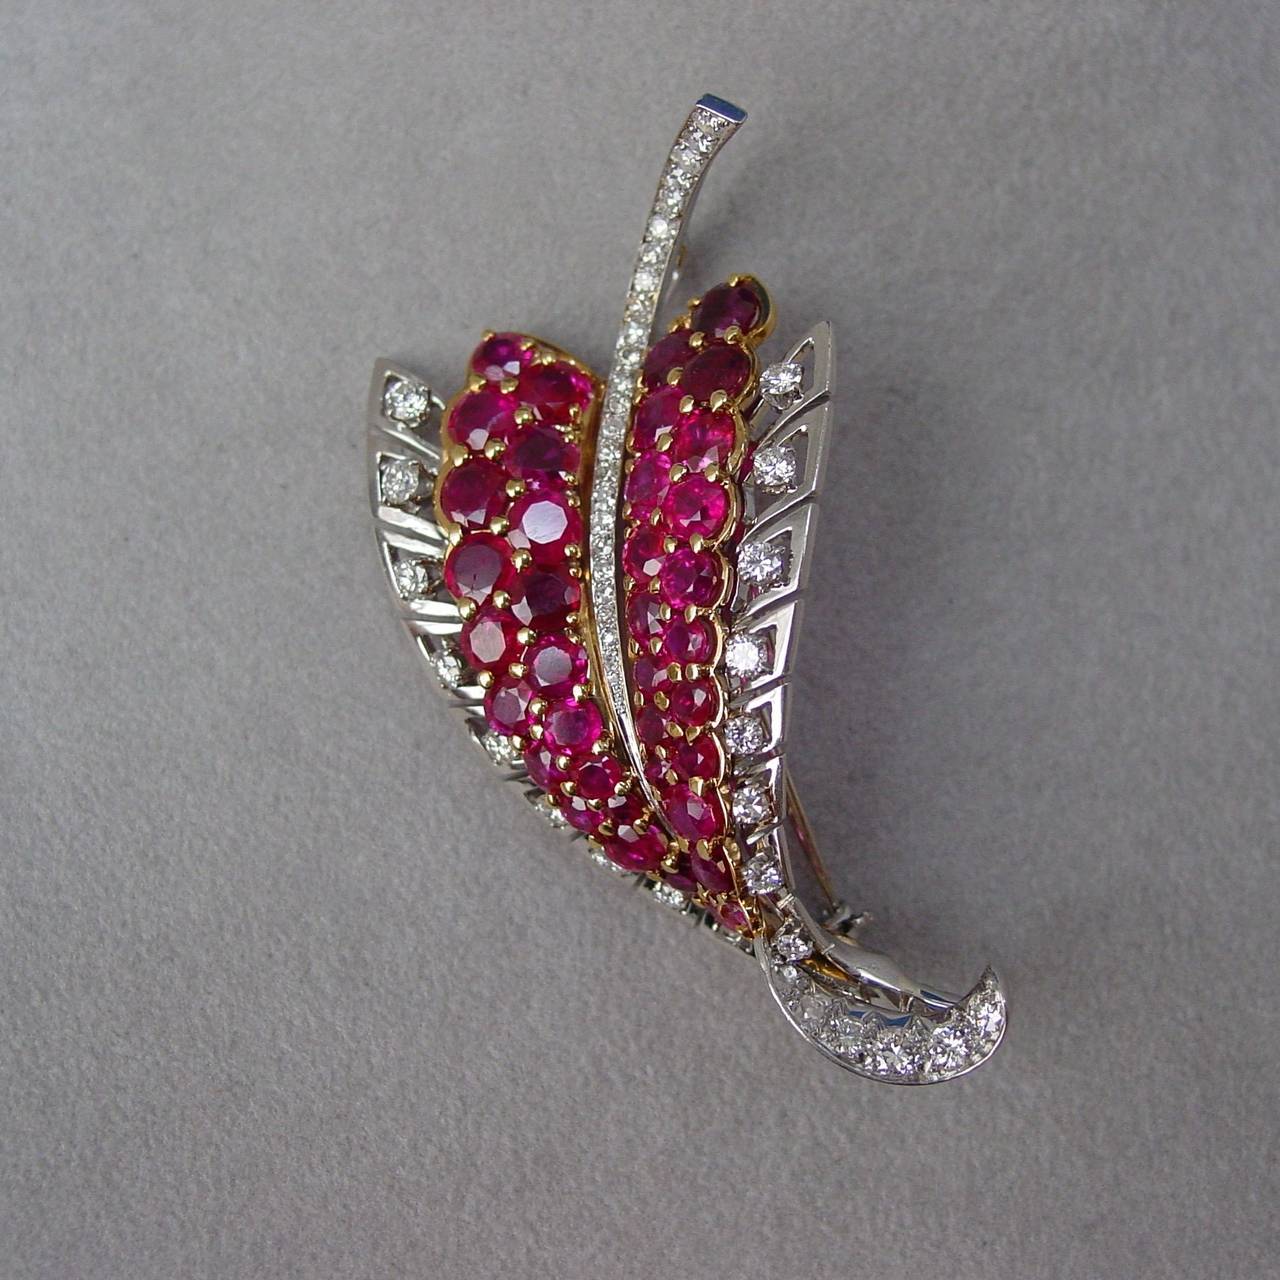 A Ruby and Diamond Foliate Brooch. This very pretty and well made brooch is mounted in 18 karat yellow gold and platinum with findings in 14 karat white gold. Numbered 10003. The body of the brooch is set with round cut rubies and full cut diamonds